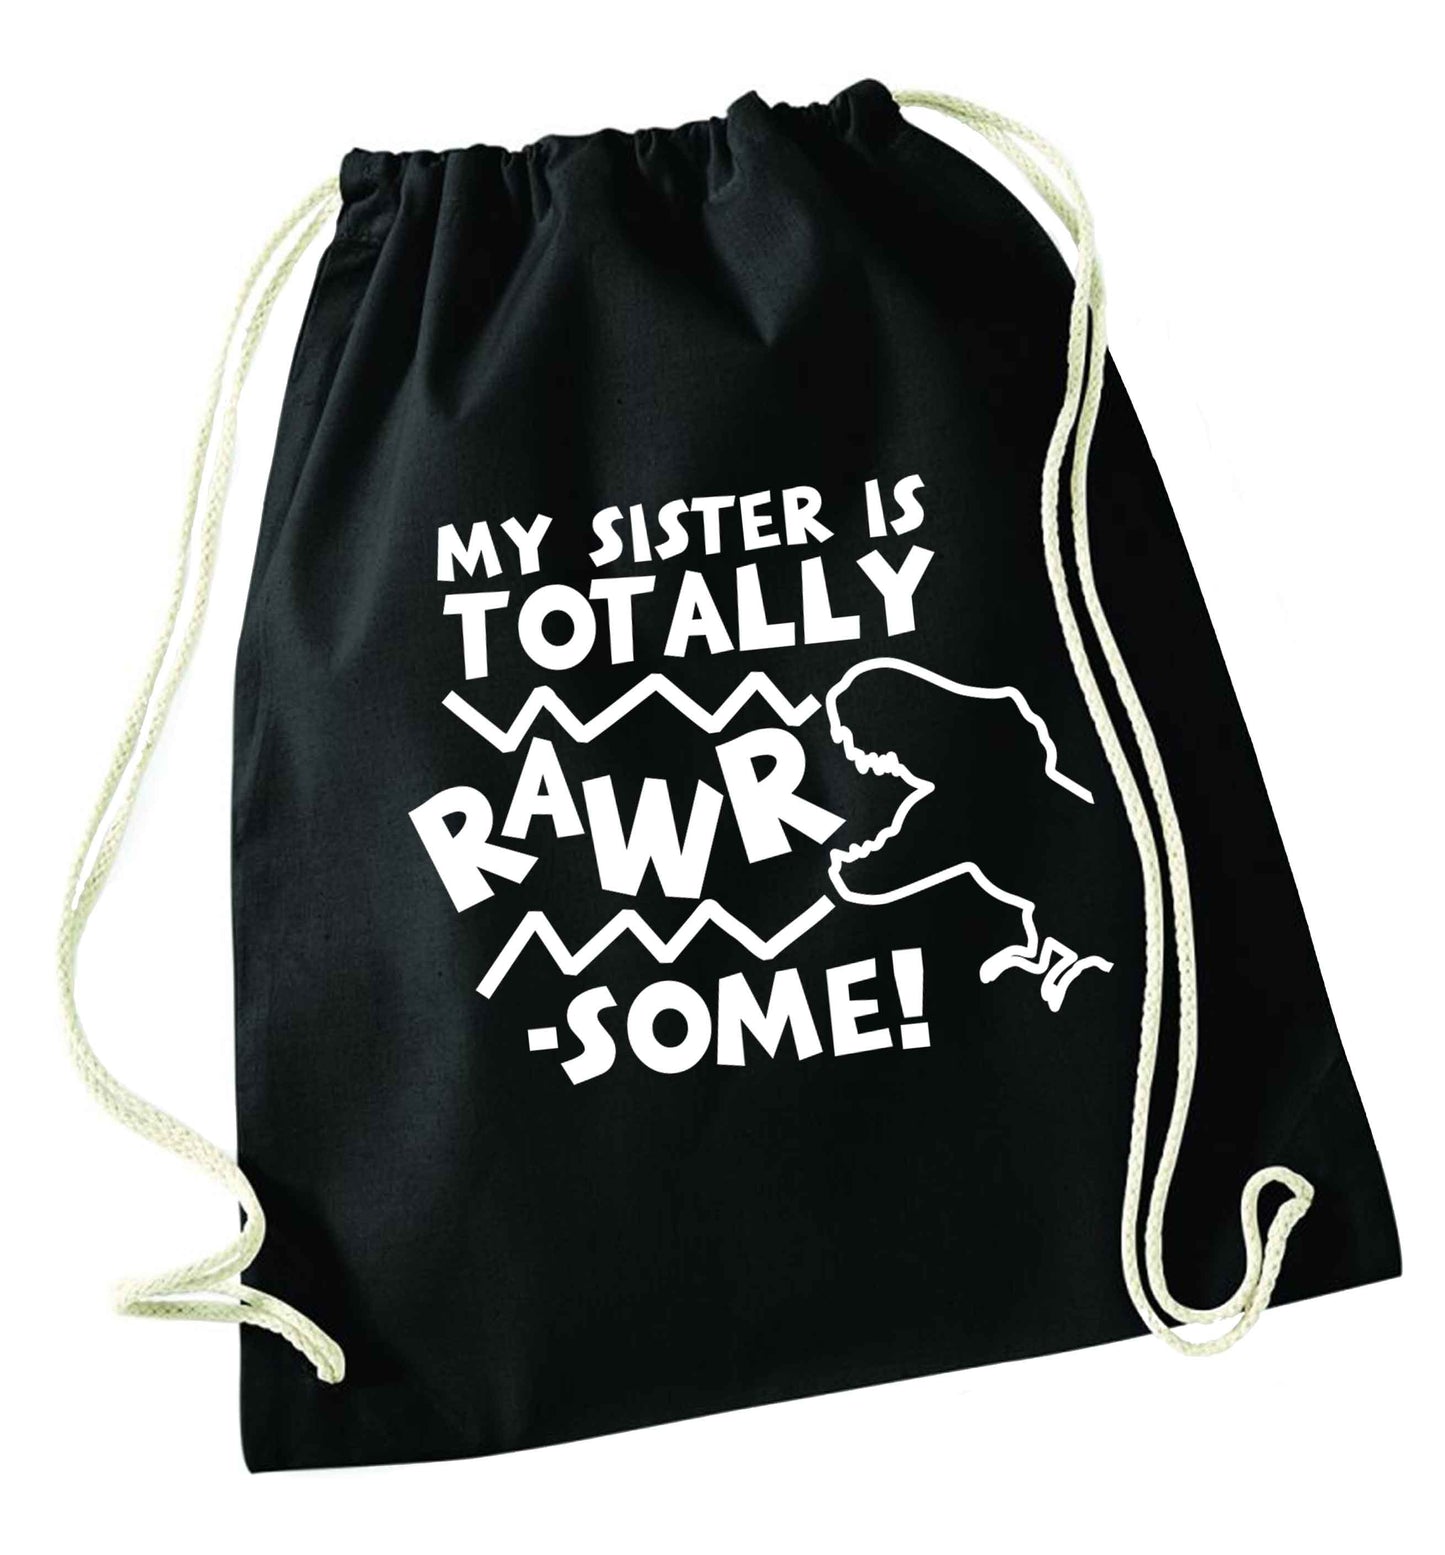 My sister is totally rawrsome black drawstring bag